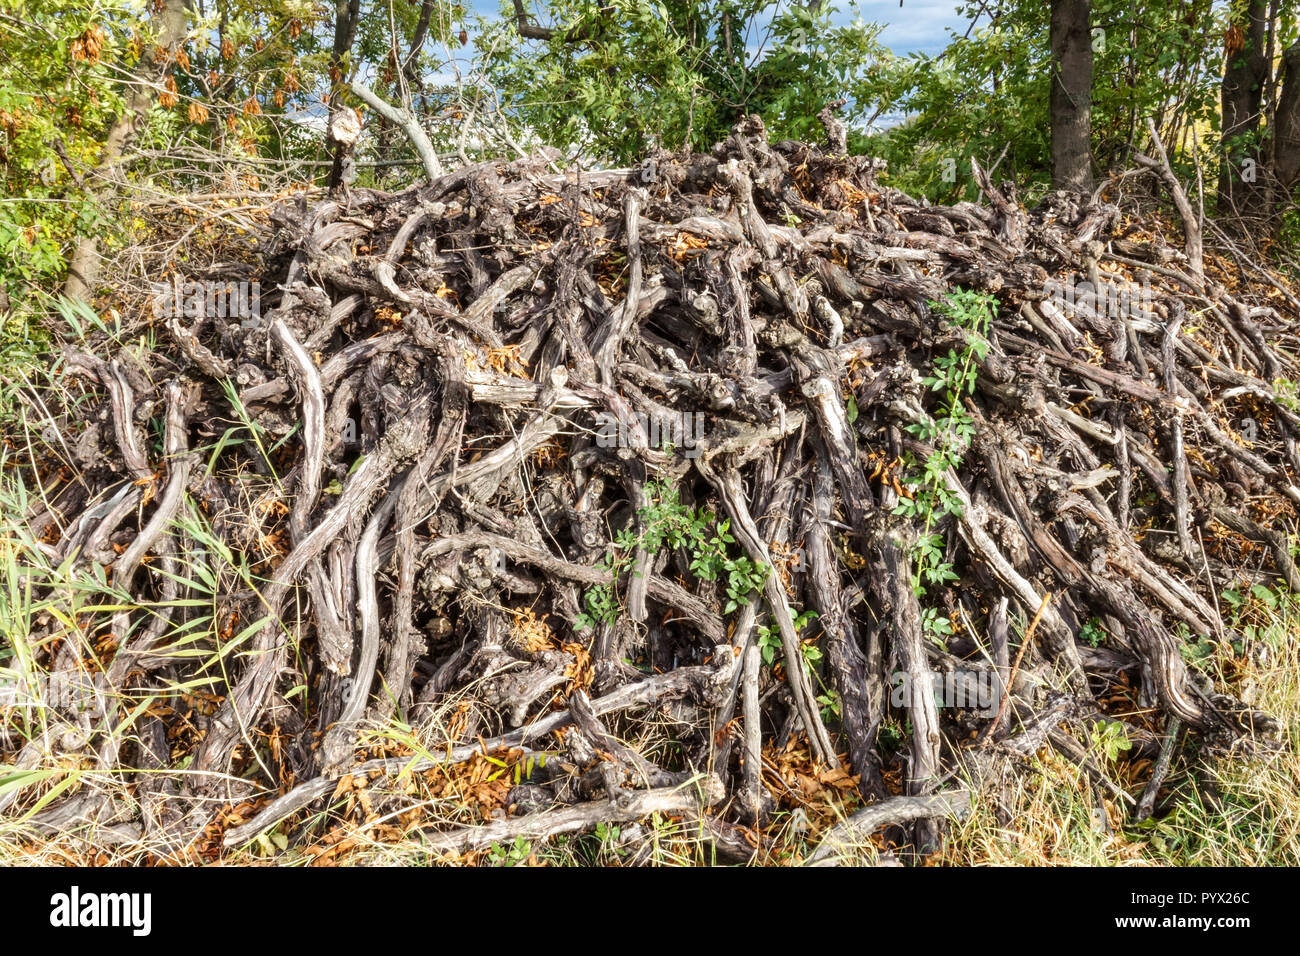 Pile of old grapevines trunks Stock Photo